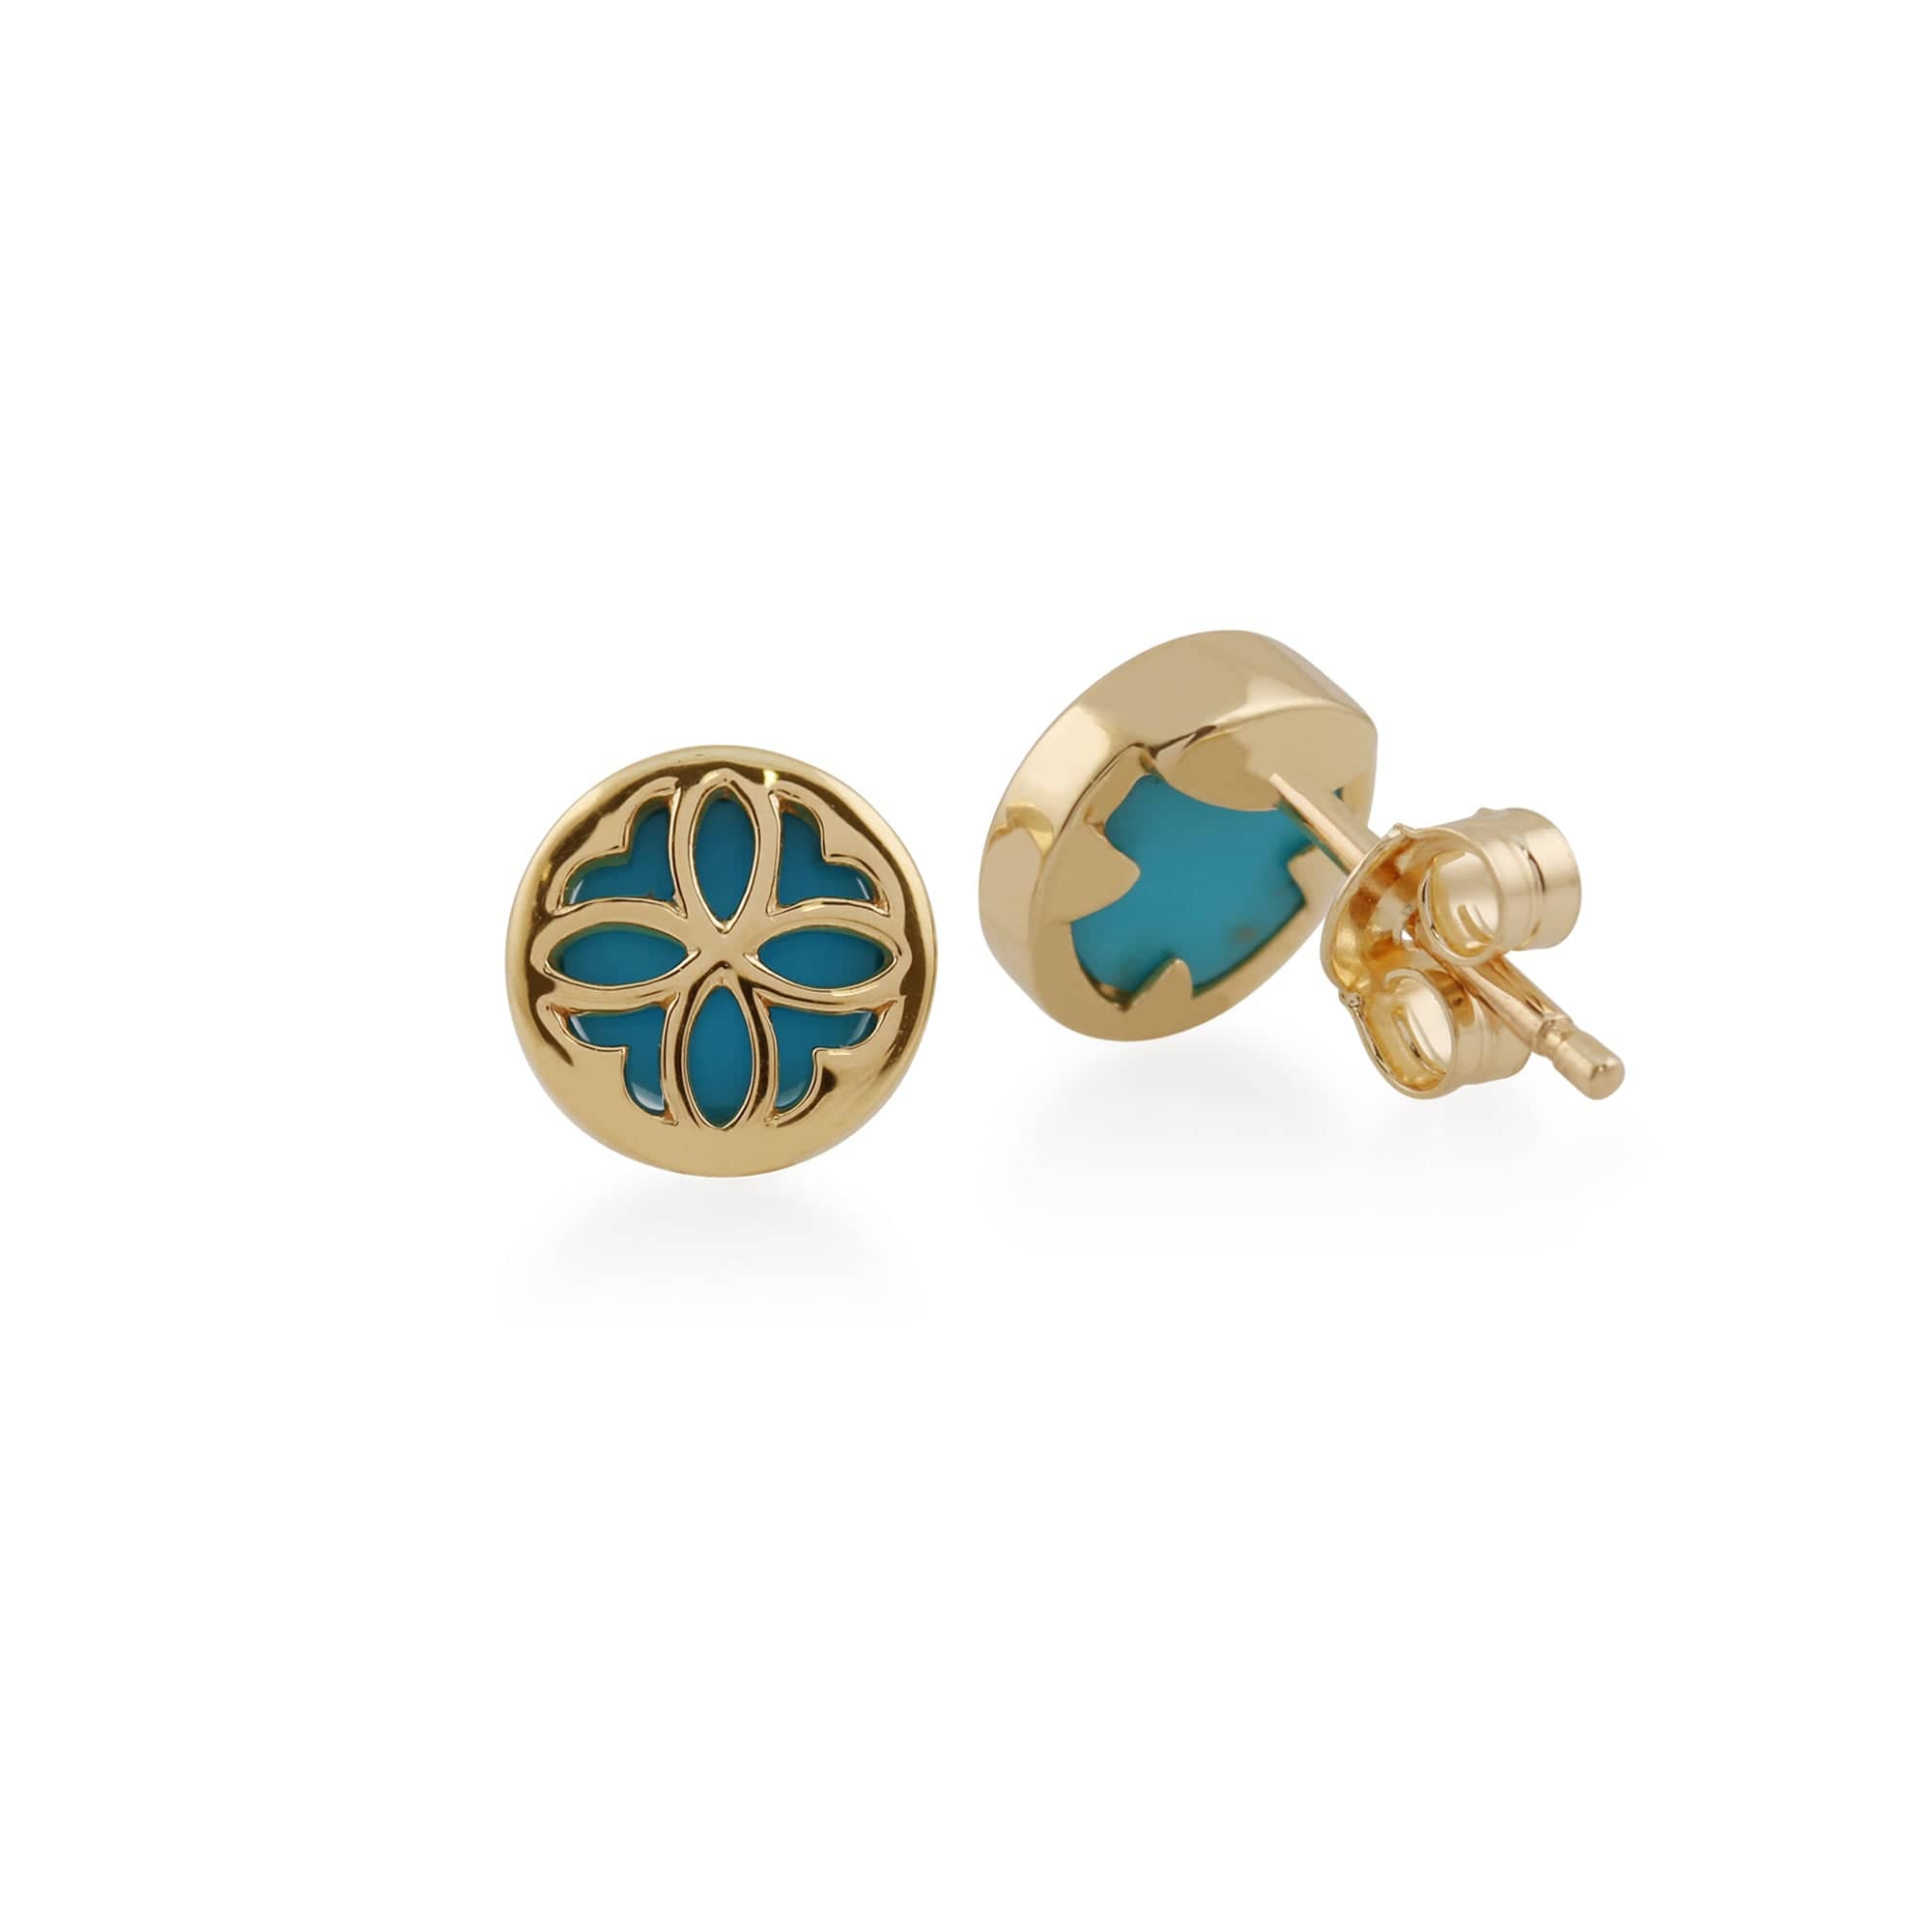 Art Nouveau Style Round Turquoise Floral Pattern Overlay Stud Earrings in 9ct Yellow Gold - Gemondo